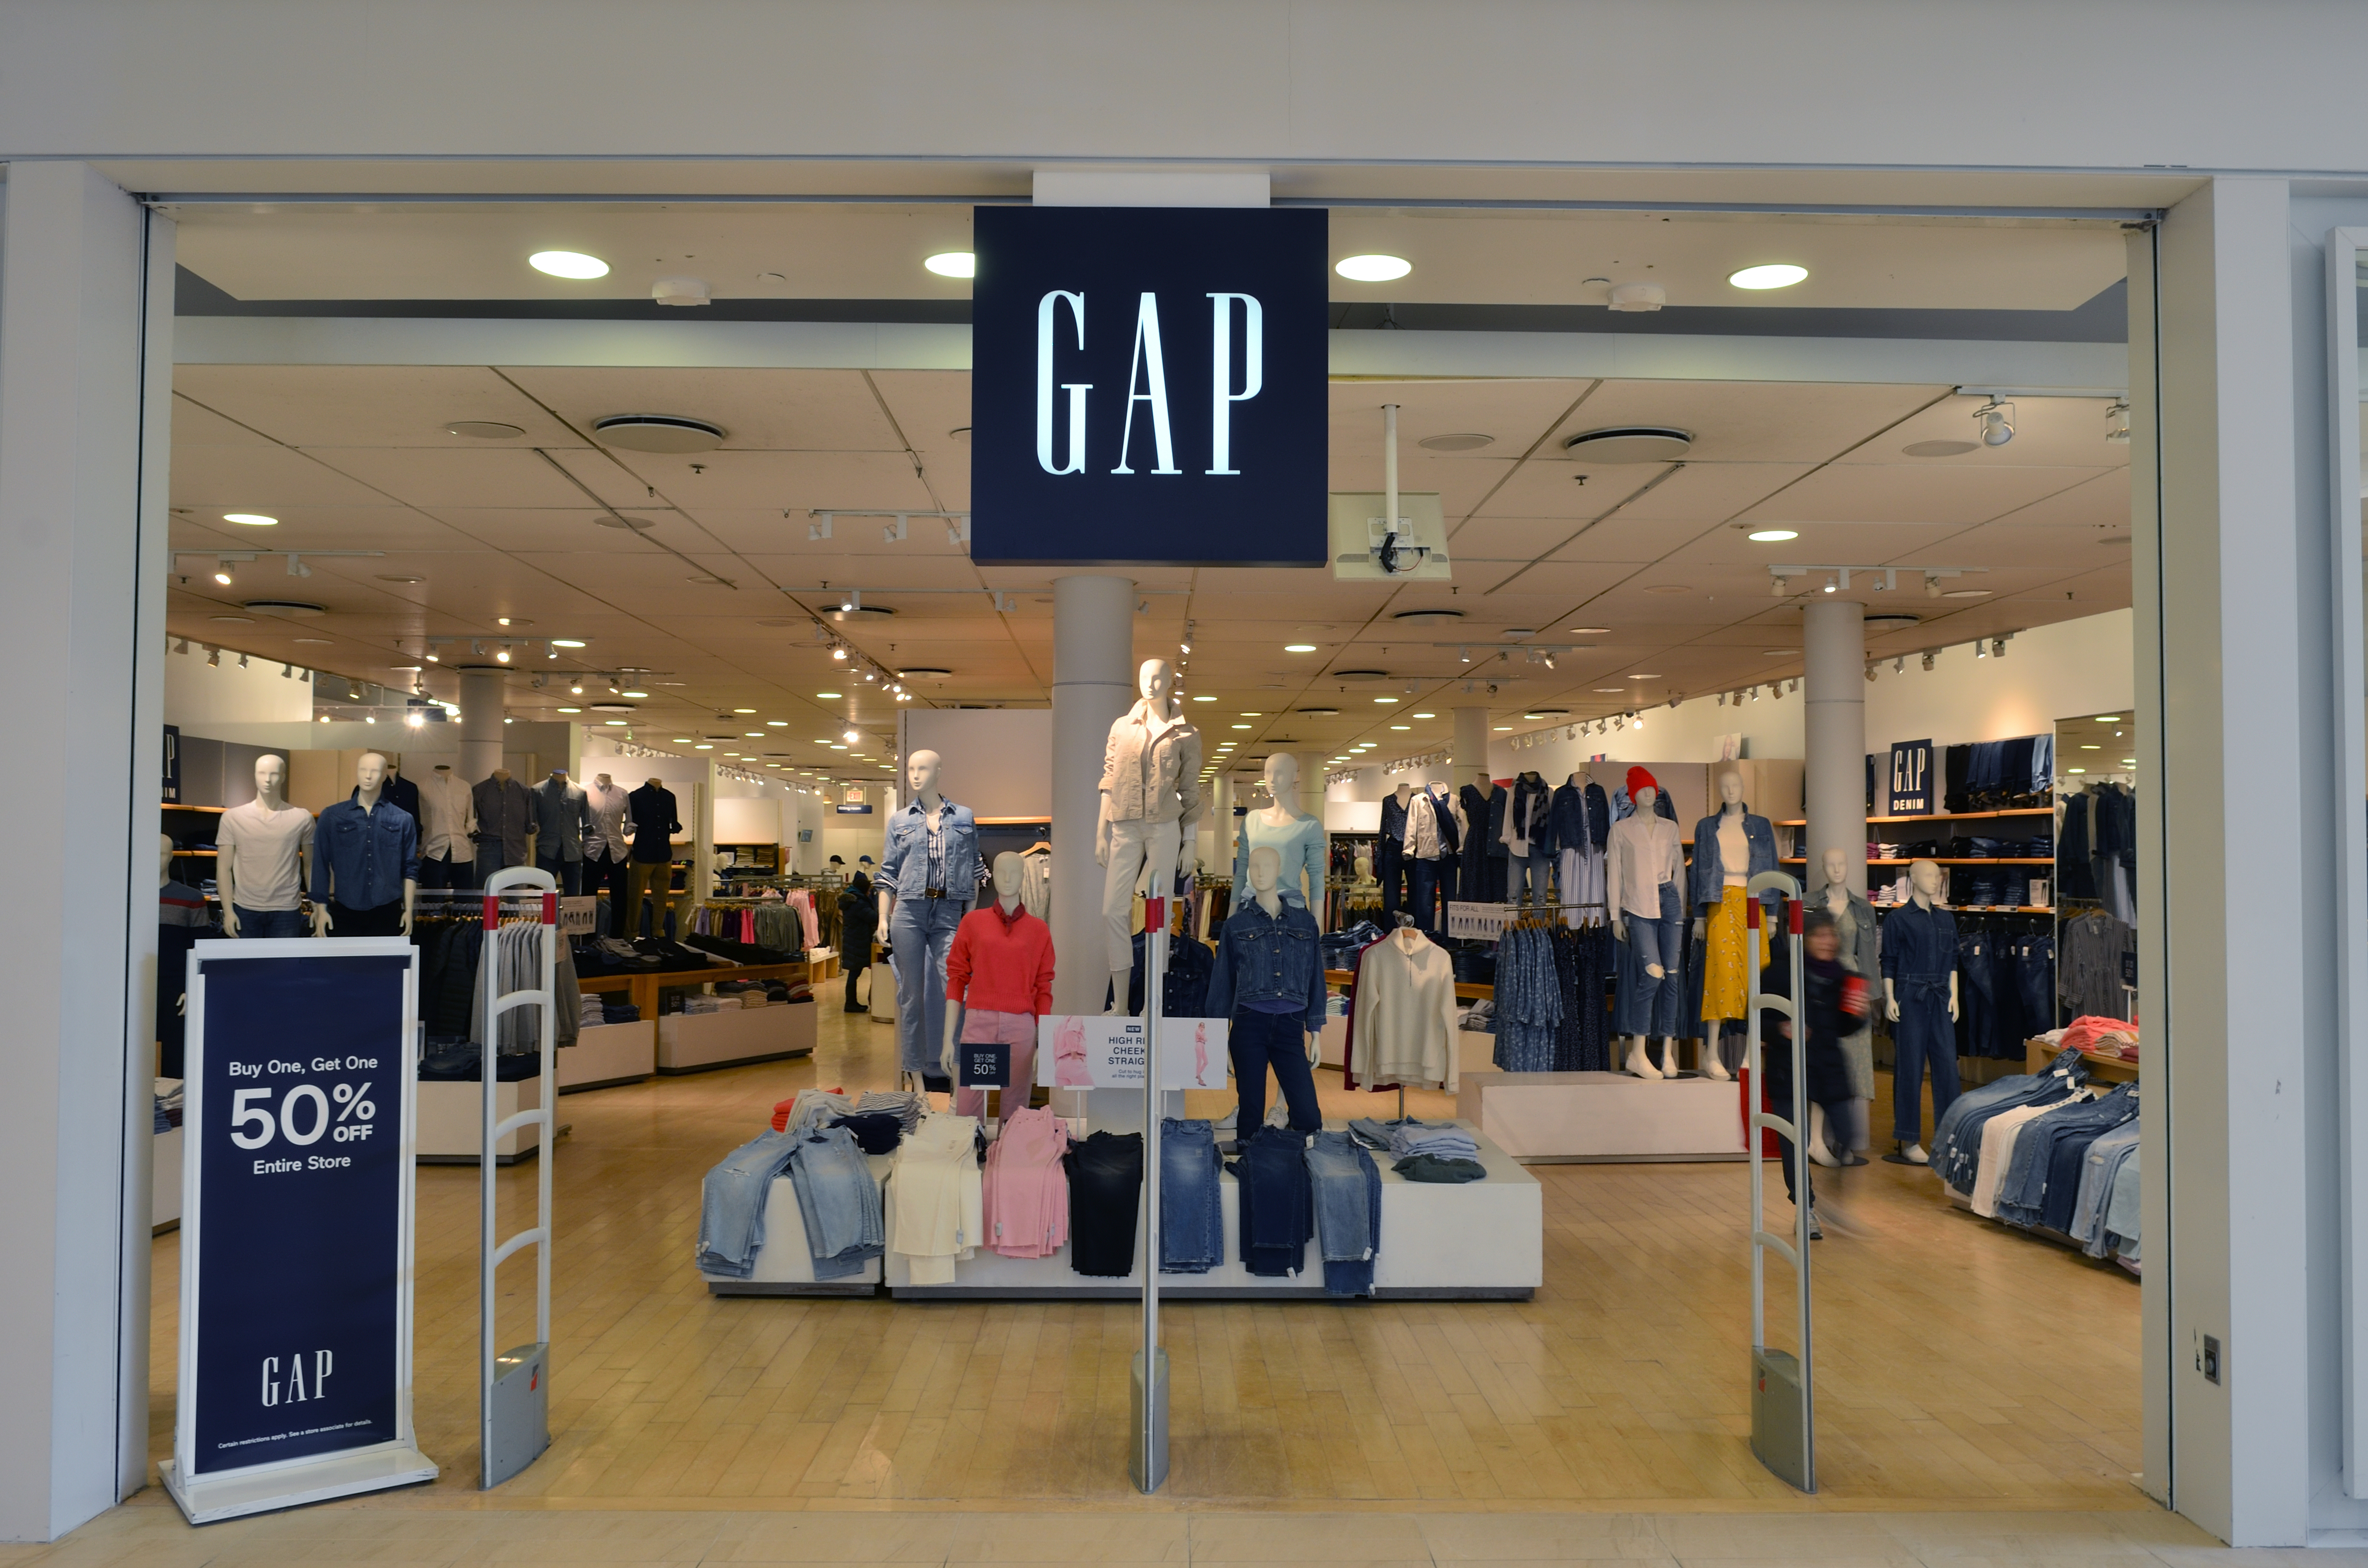 Latest layoff from Gap to layoff over 500 workers in apparel retailer’s bid to cut costs